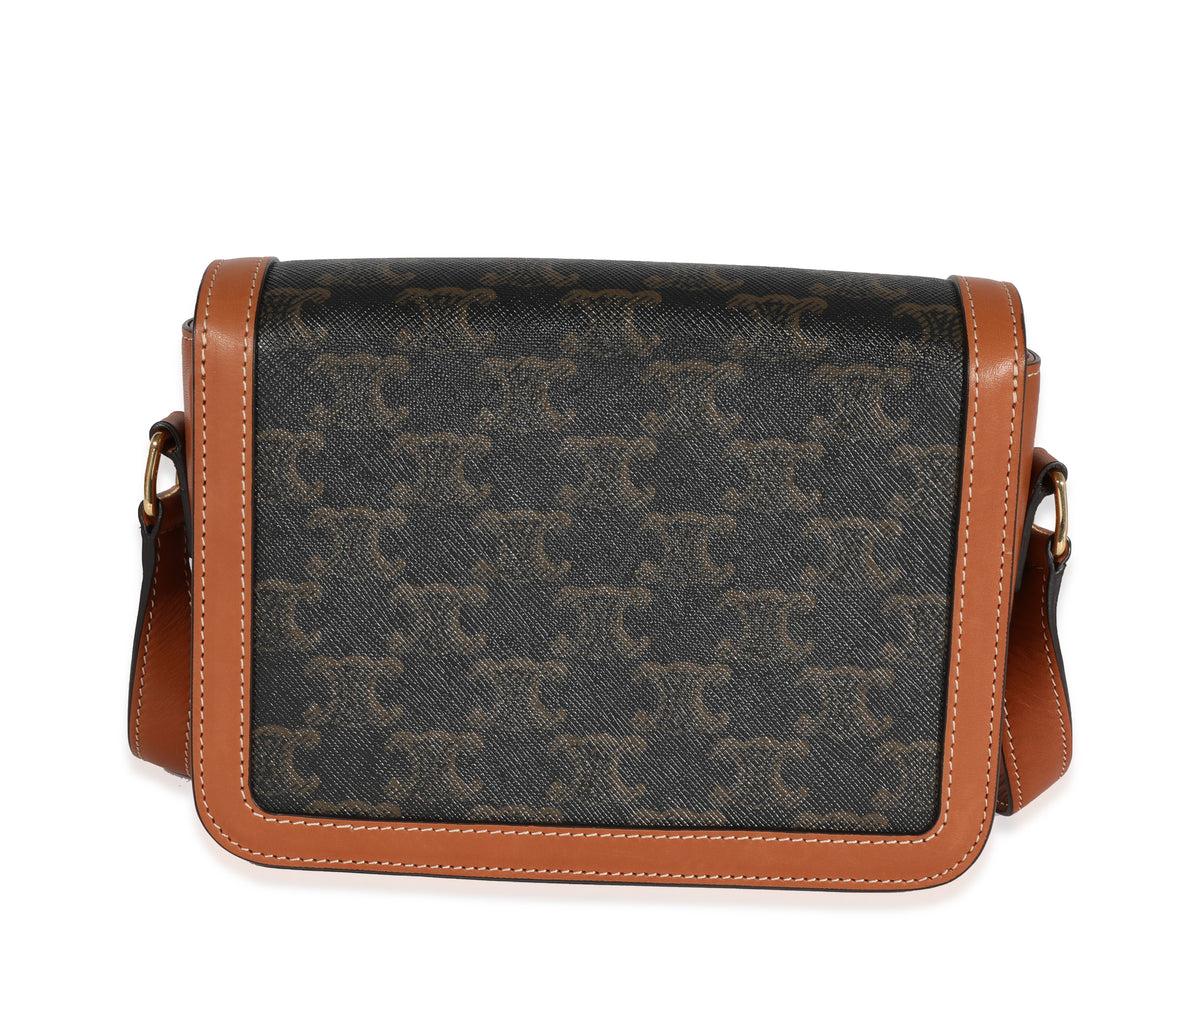 Celine - Teen Triomphe Bag in Triomphe Canvas and Calfskin Leather - Brown - for Women